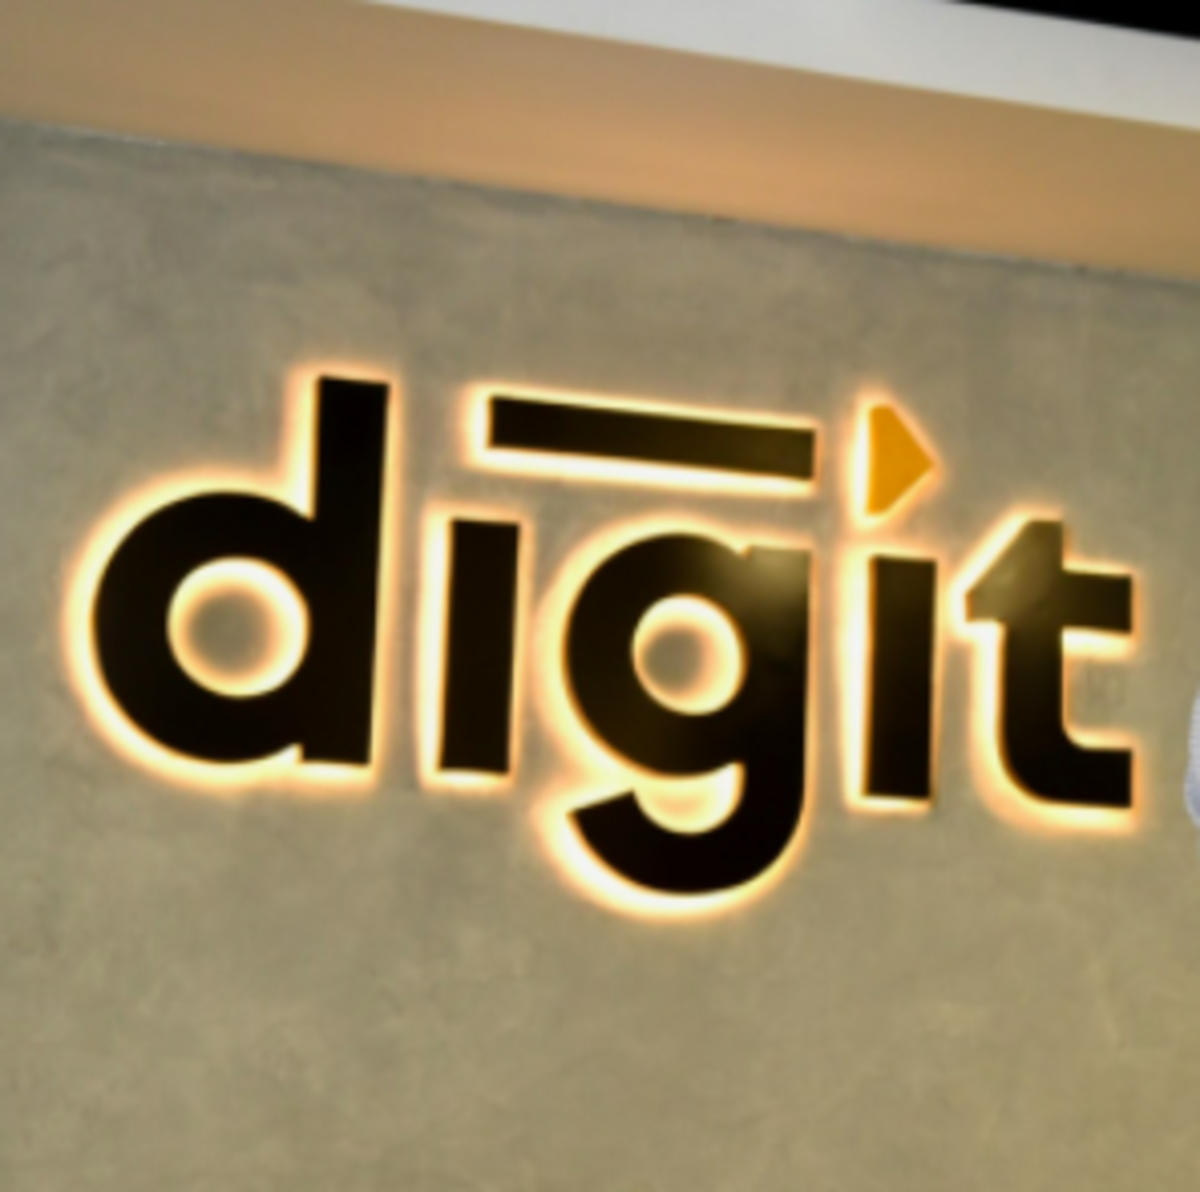 Digitiqe | Audiovisual and Full-Service Technology Boutique